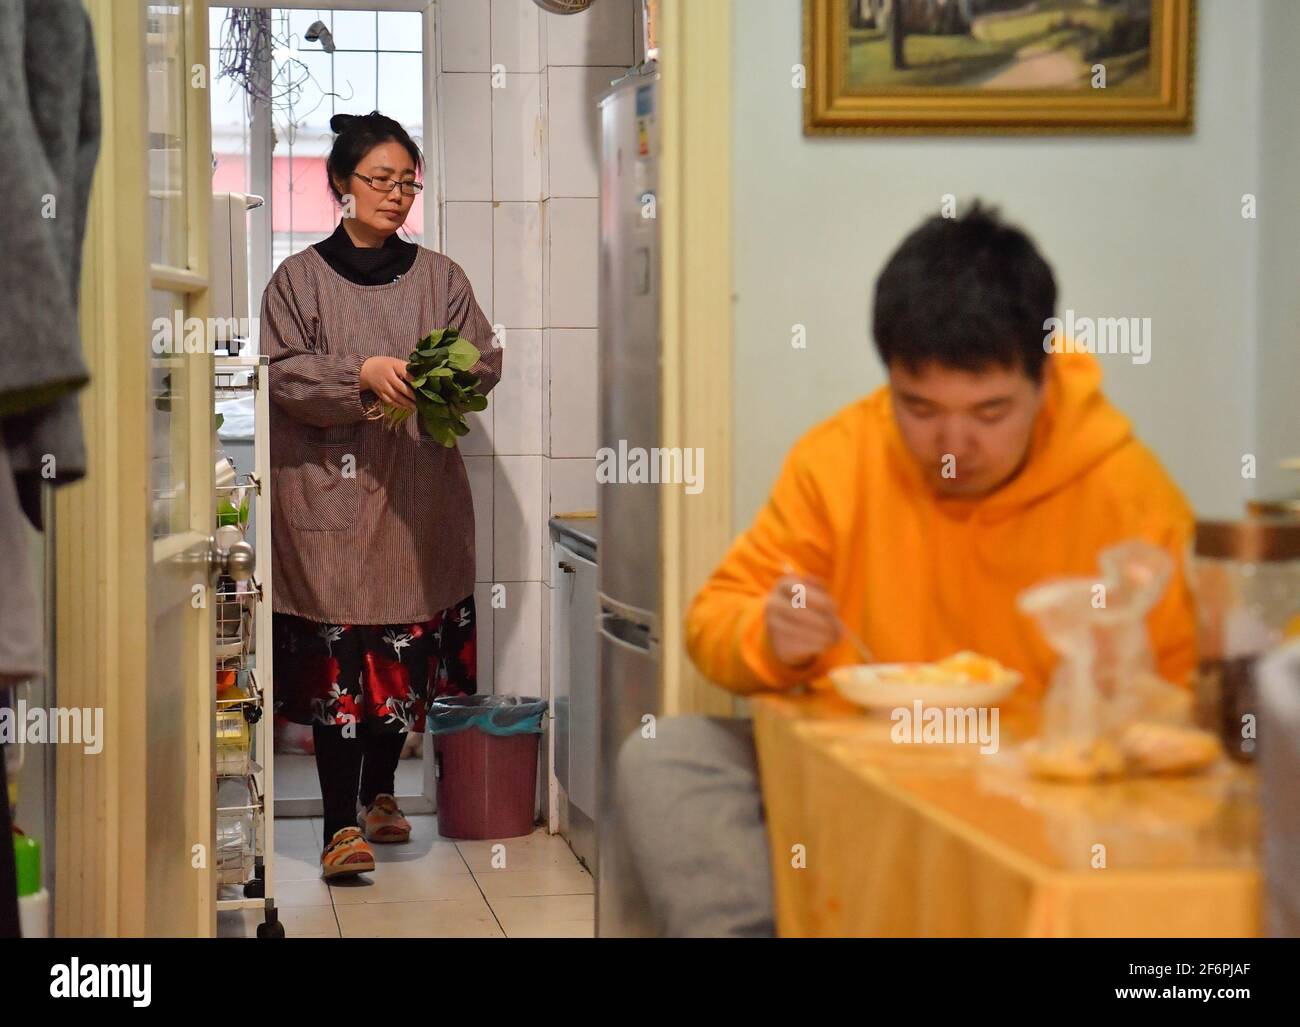 (210402) -- TIANJIN, April 2, 2021 (Xinhua) -- Wu Guixiang does house chores as her son Zhang Hao, diagnosed with autism, finishes his dinner in Hebei District, north China's Tianjin, March 29, 2021.  In 1998, Zhang Hao was diagnosed with autism at the age of two. Ever since the diagnosis, Zhang's mother Wu Guixiang has spent all her time looking after her son.    In order to help Zhang Hao and eight others with autism improve their social engagement after they had become grown-ups, Wu set up an autism training center in 2016, providing them with courses on life, social and vocational skills. Stock Photo